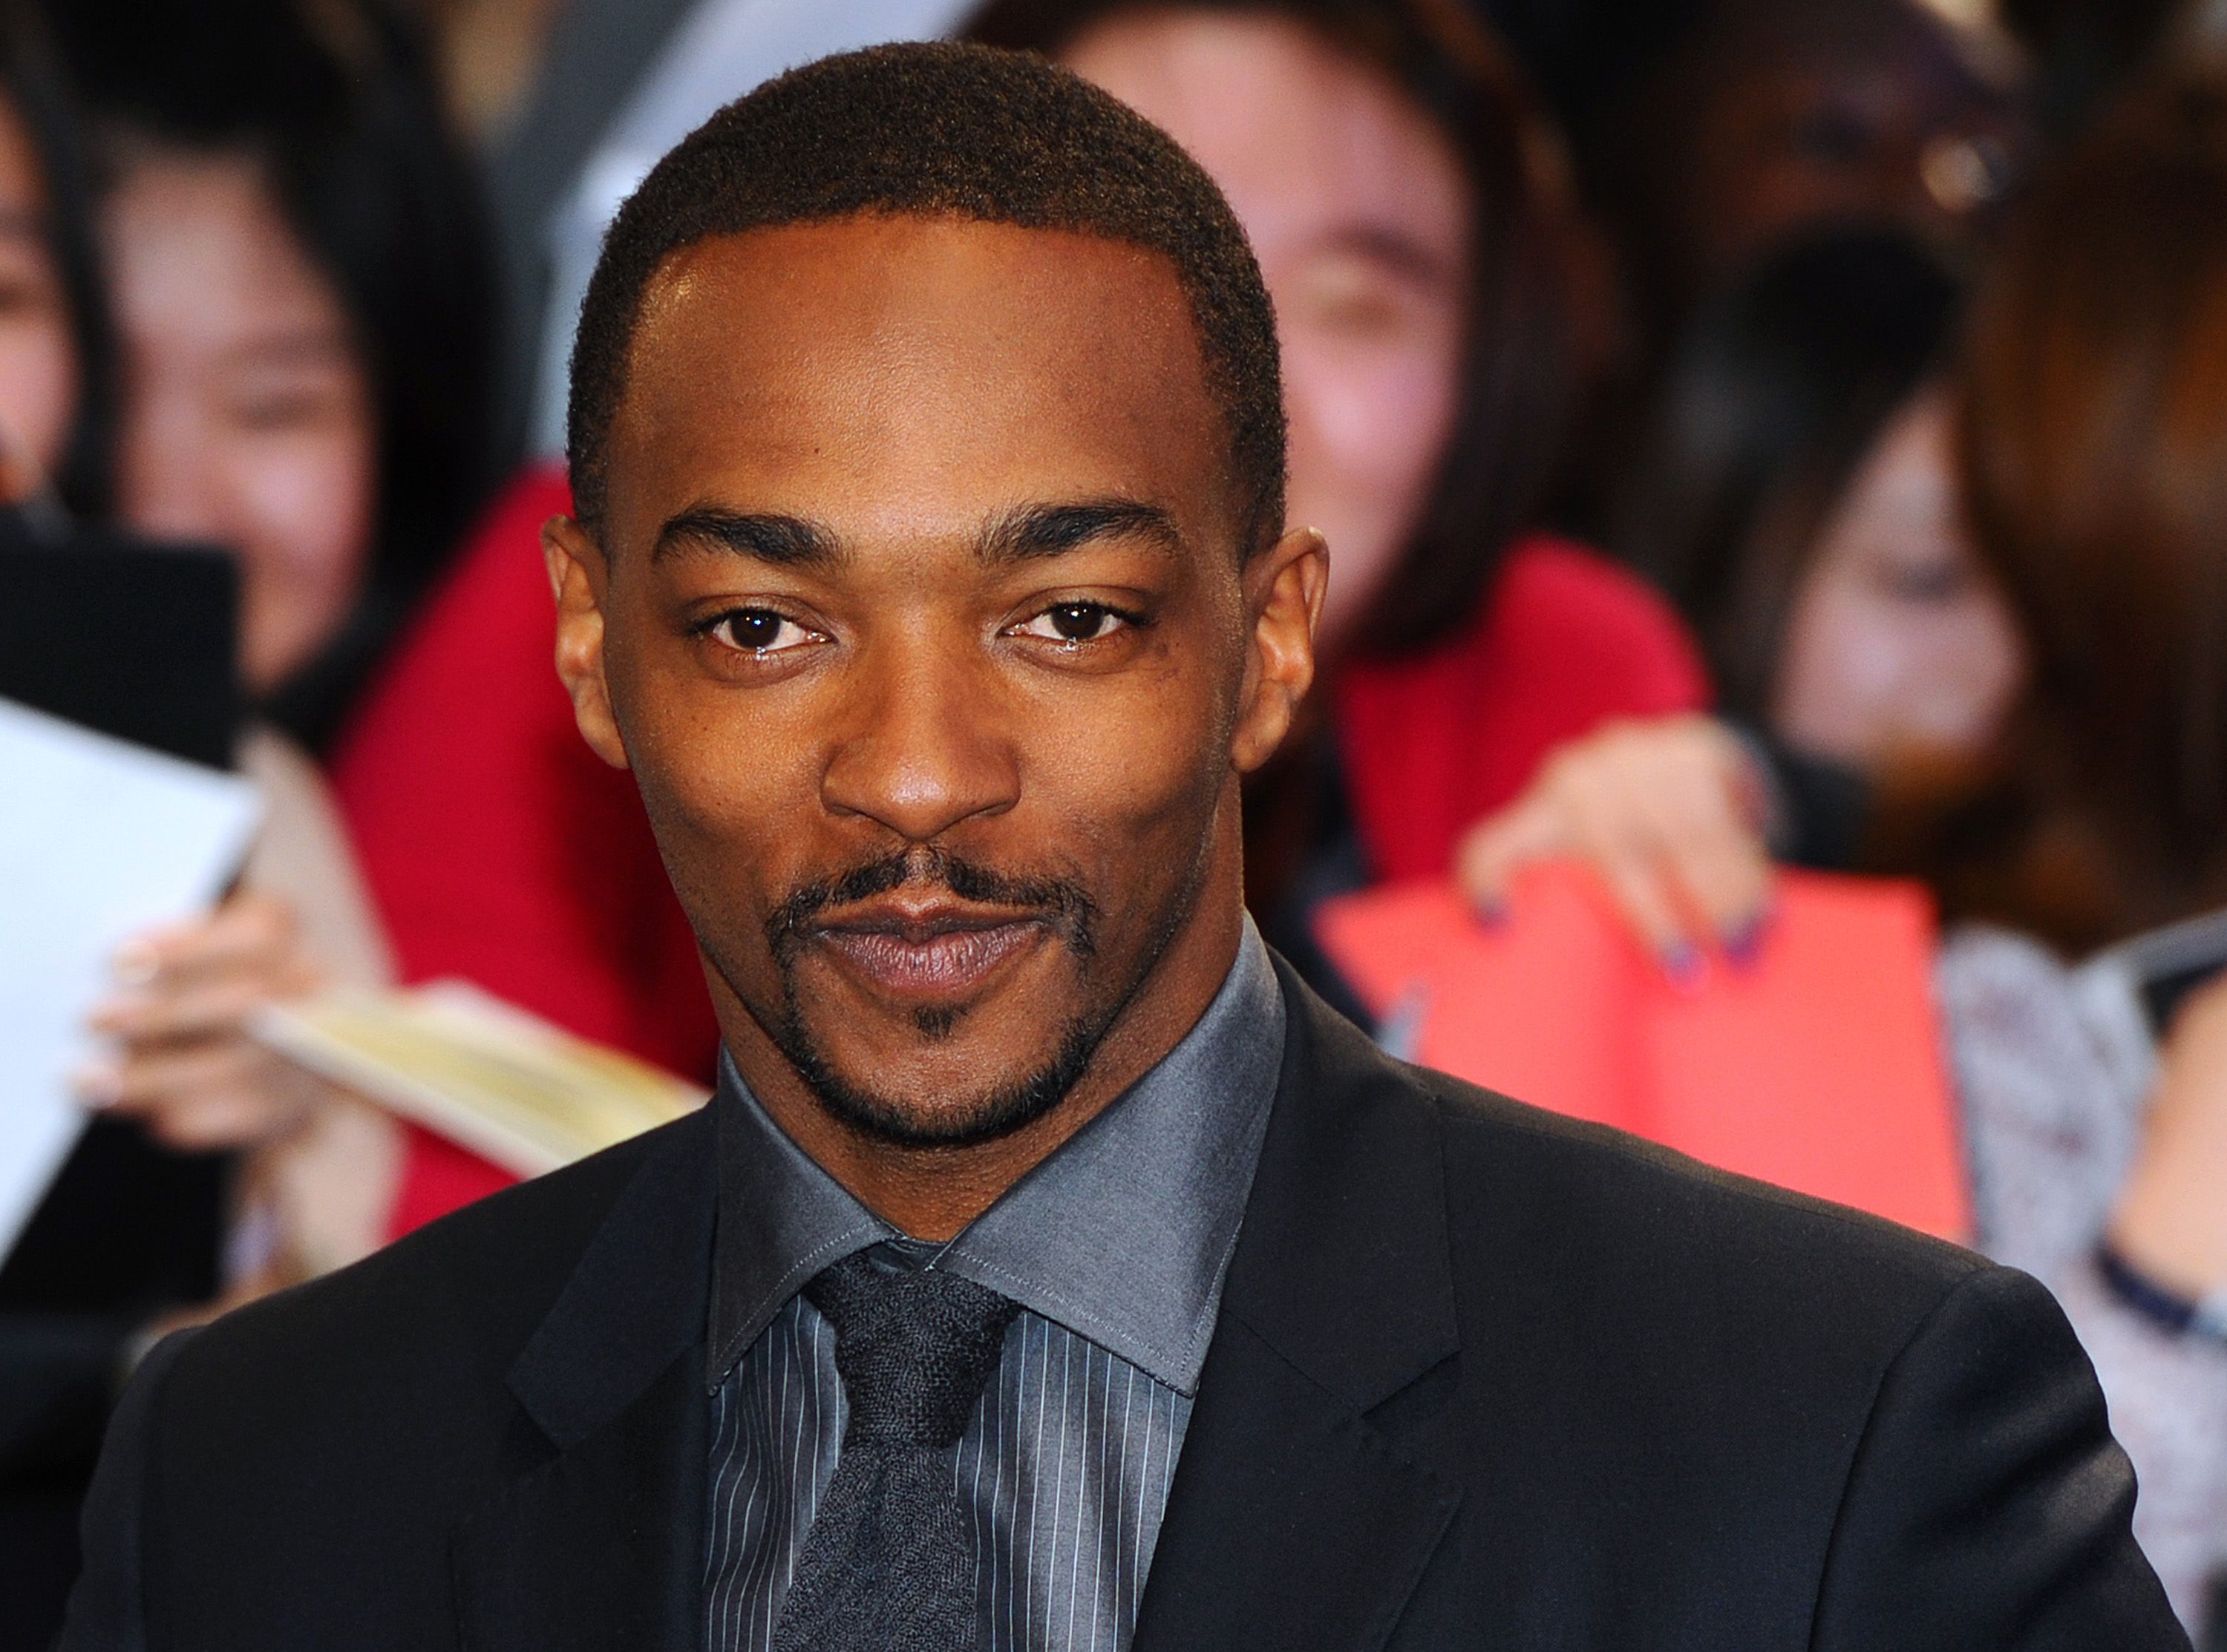 Anthony Mackie at the UK premiere of "Captain America: The Winter Soldier" at Westfield London on March 20, 2014, in London, England.  |  Source: Getty Images